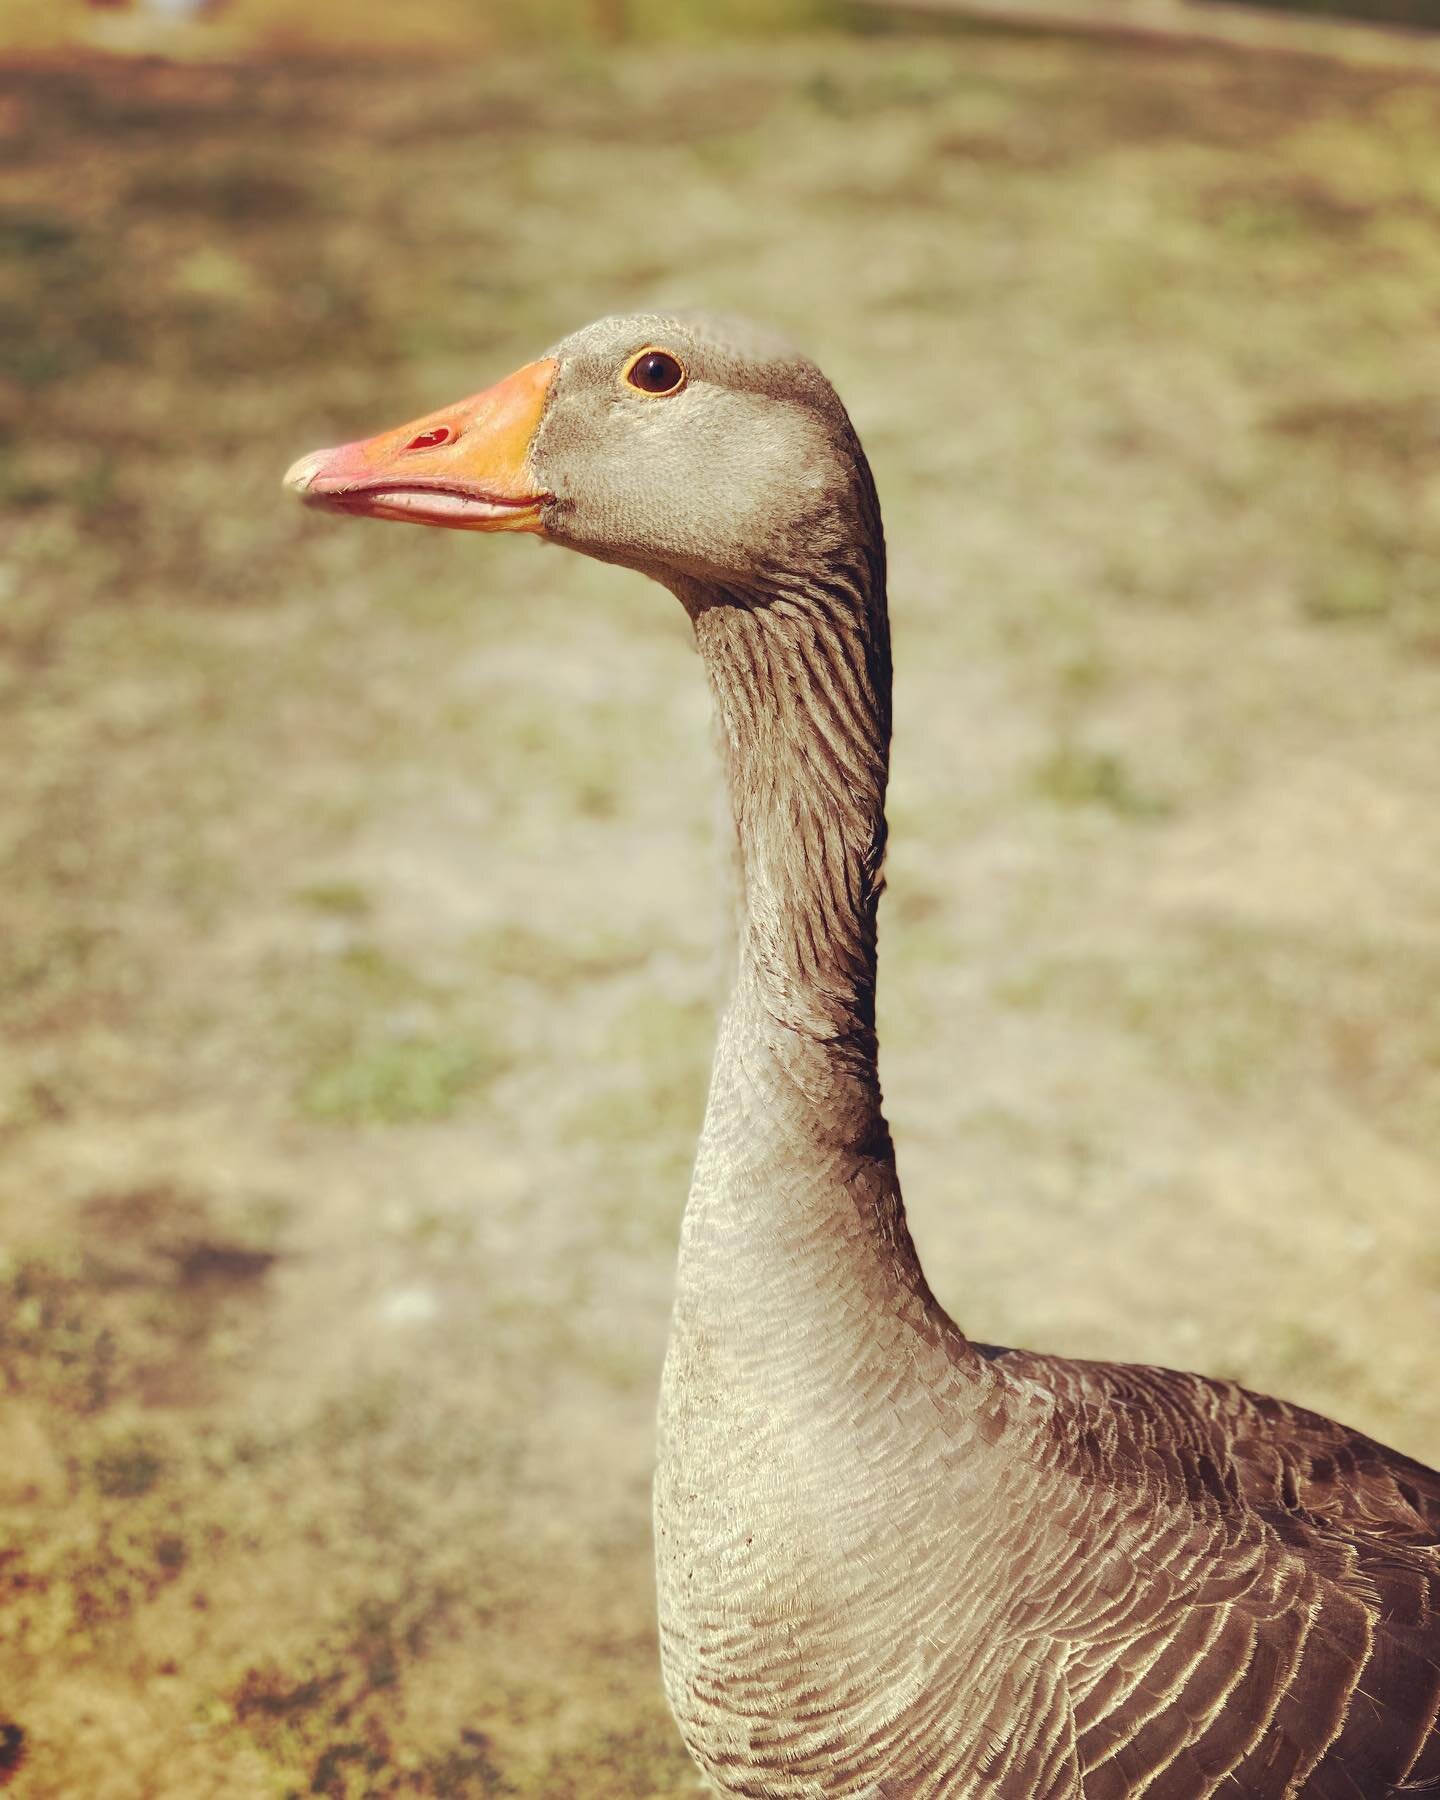 Ever feel like you&rsquo;re being watched&hellip;

@bucklandparklake geese are pretty sassy!

#geeseofinstagram #nosuddenmovements #getoutside #getoutdoors #wildlife #naturecure